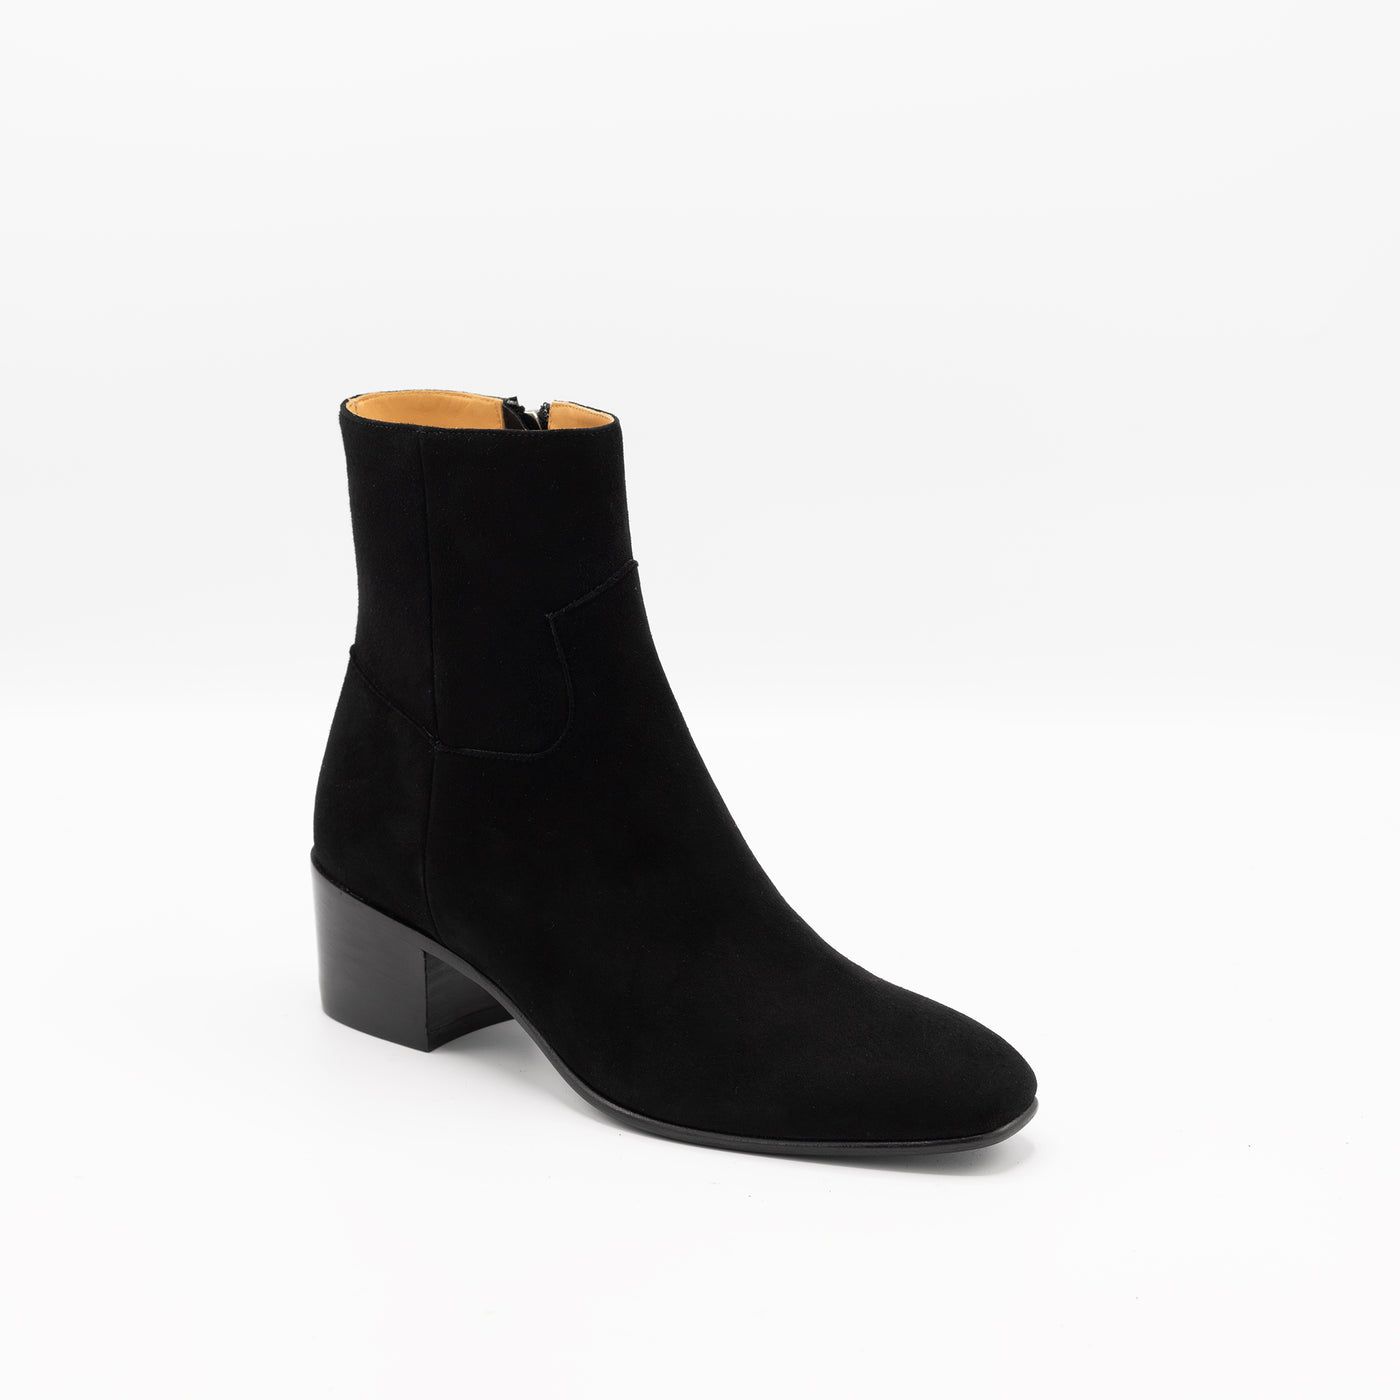 Black suede leather ankle boots with block heel and almond toe. 